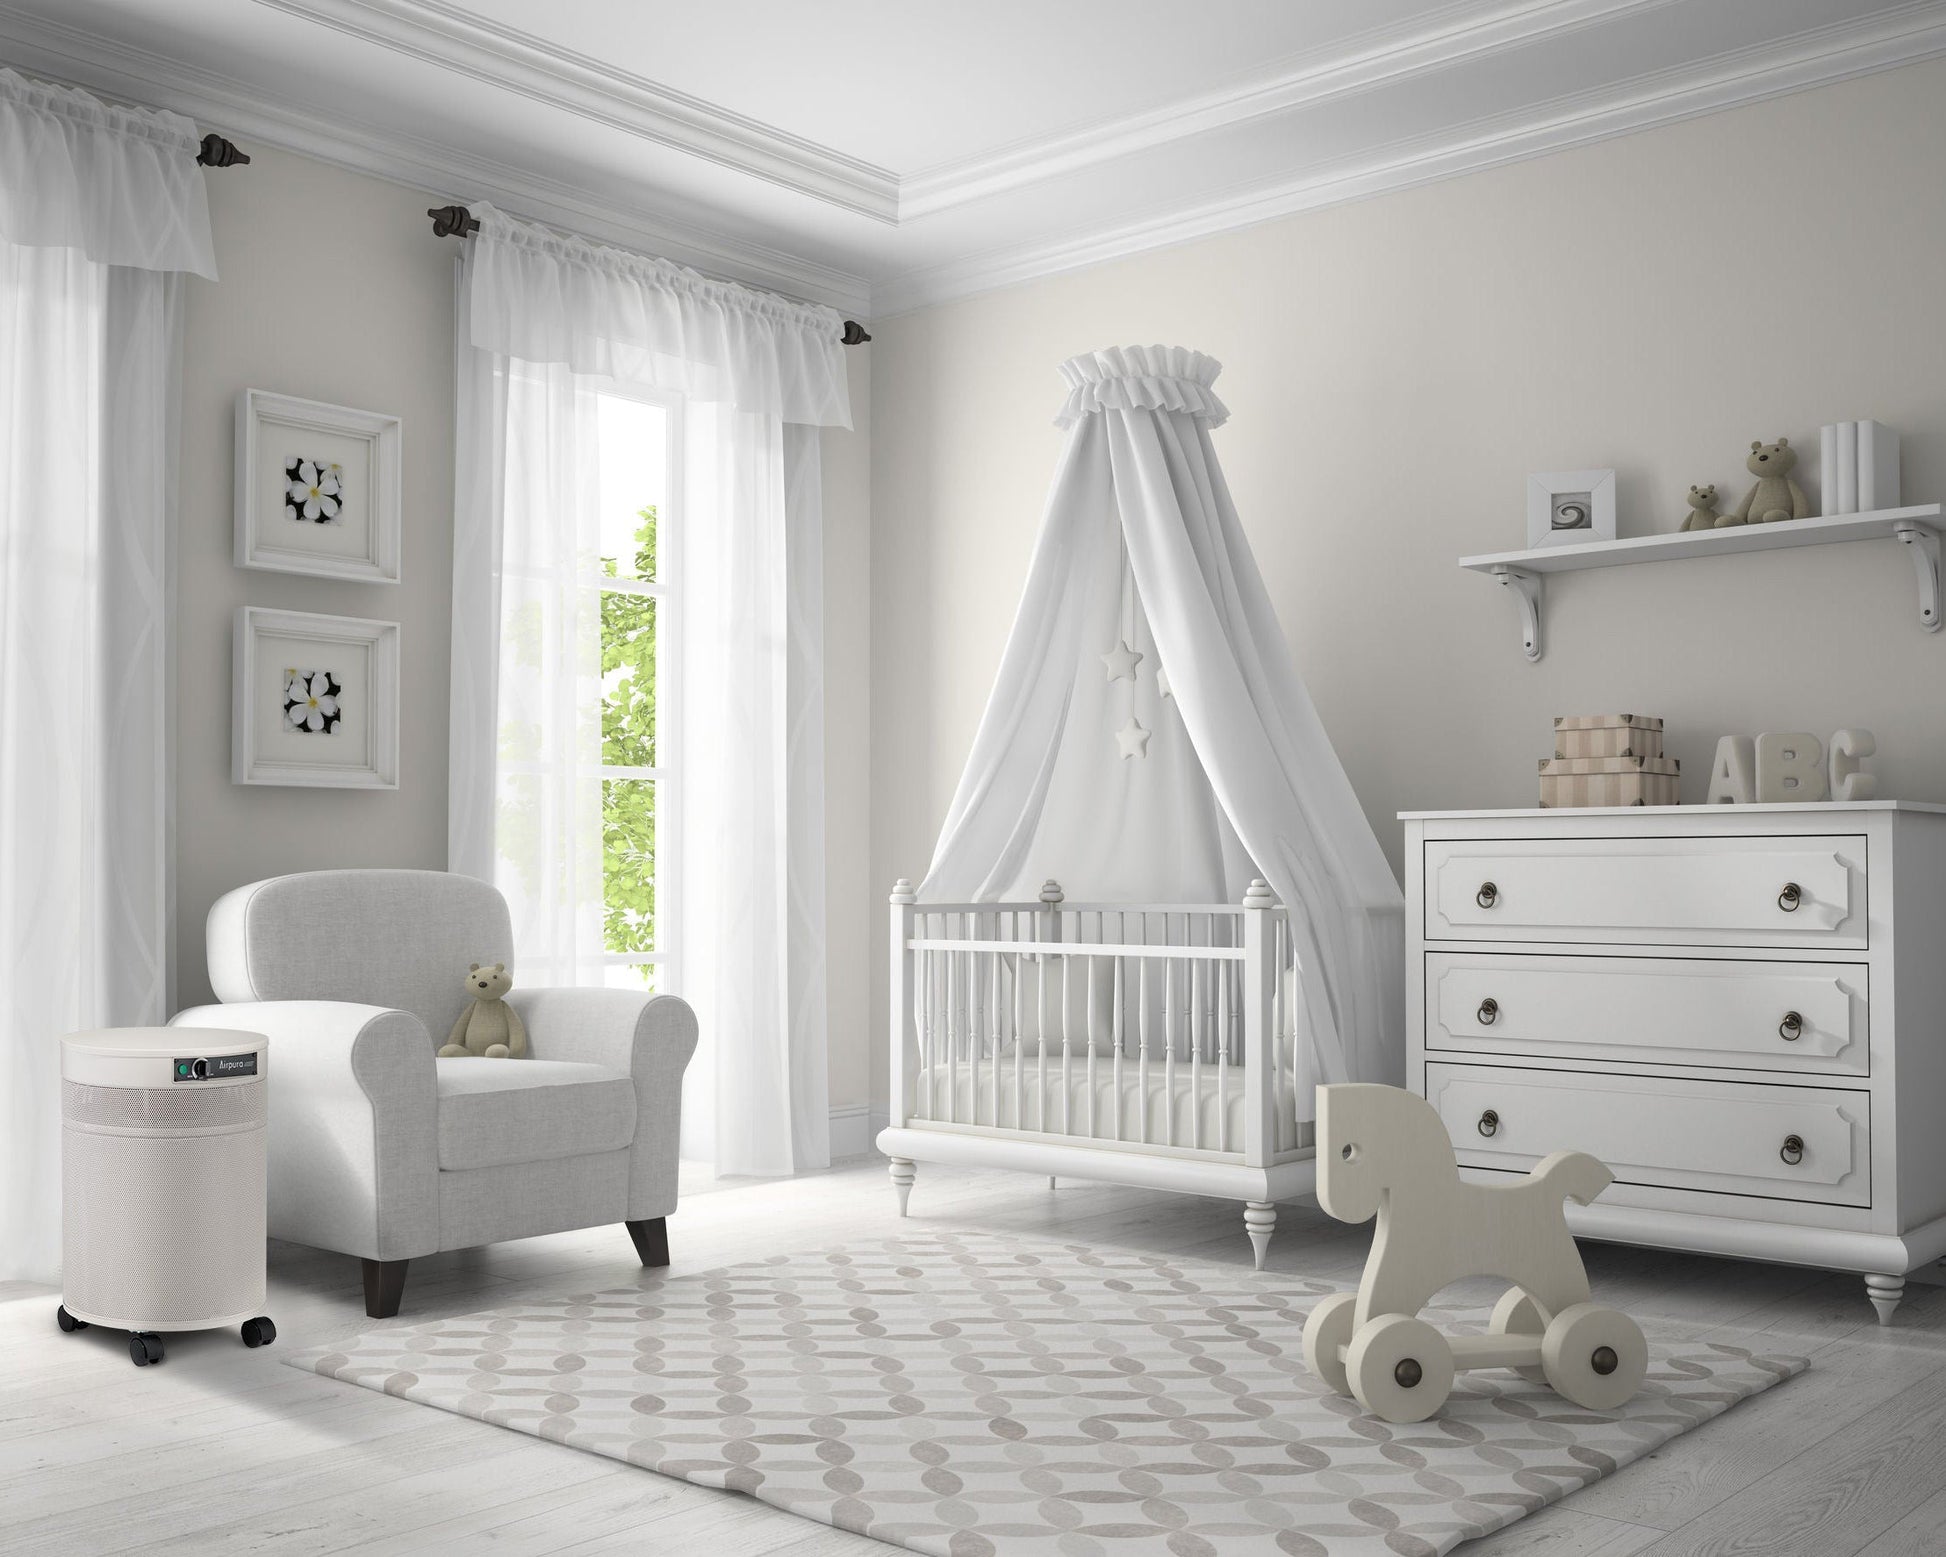 Children's room with air purifier from Airpura Industries